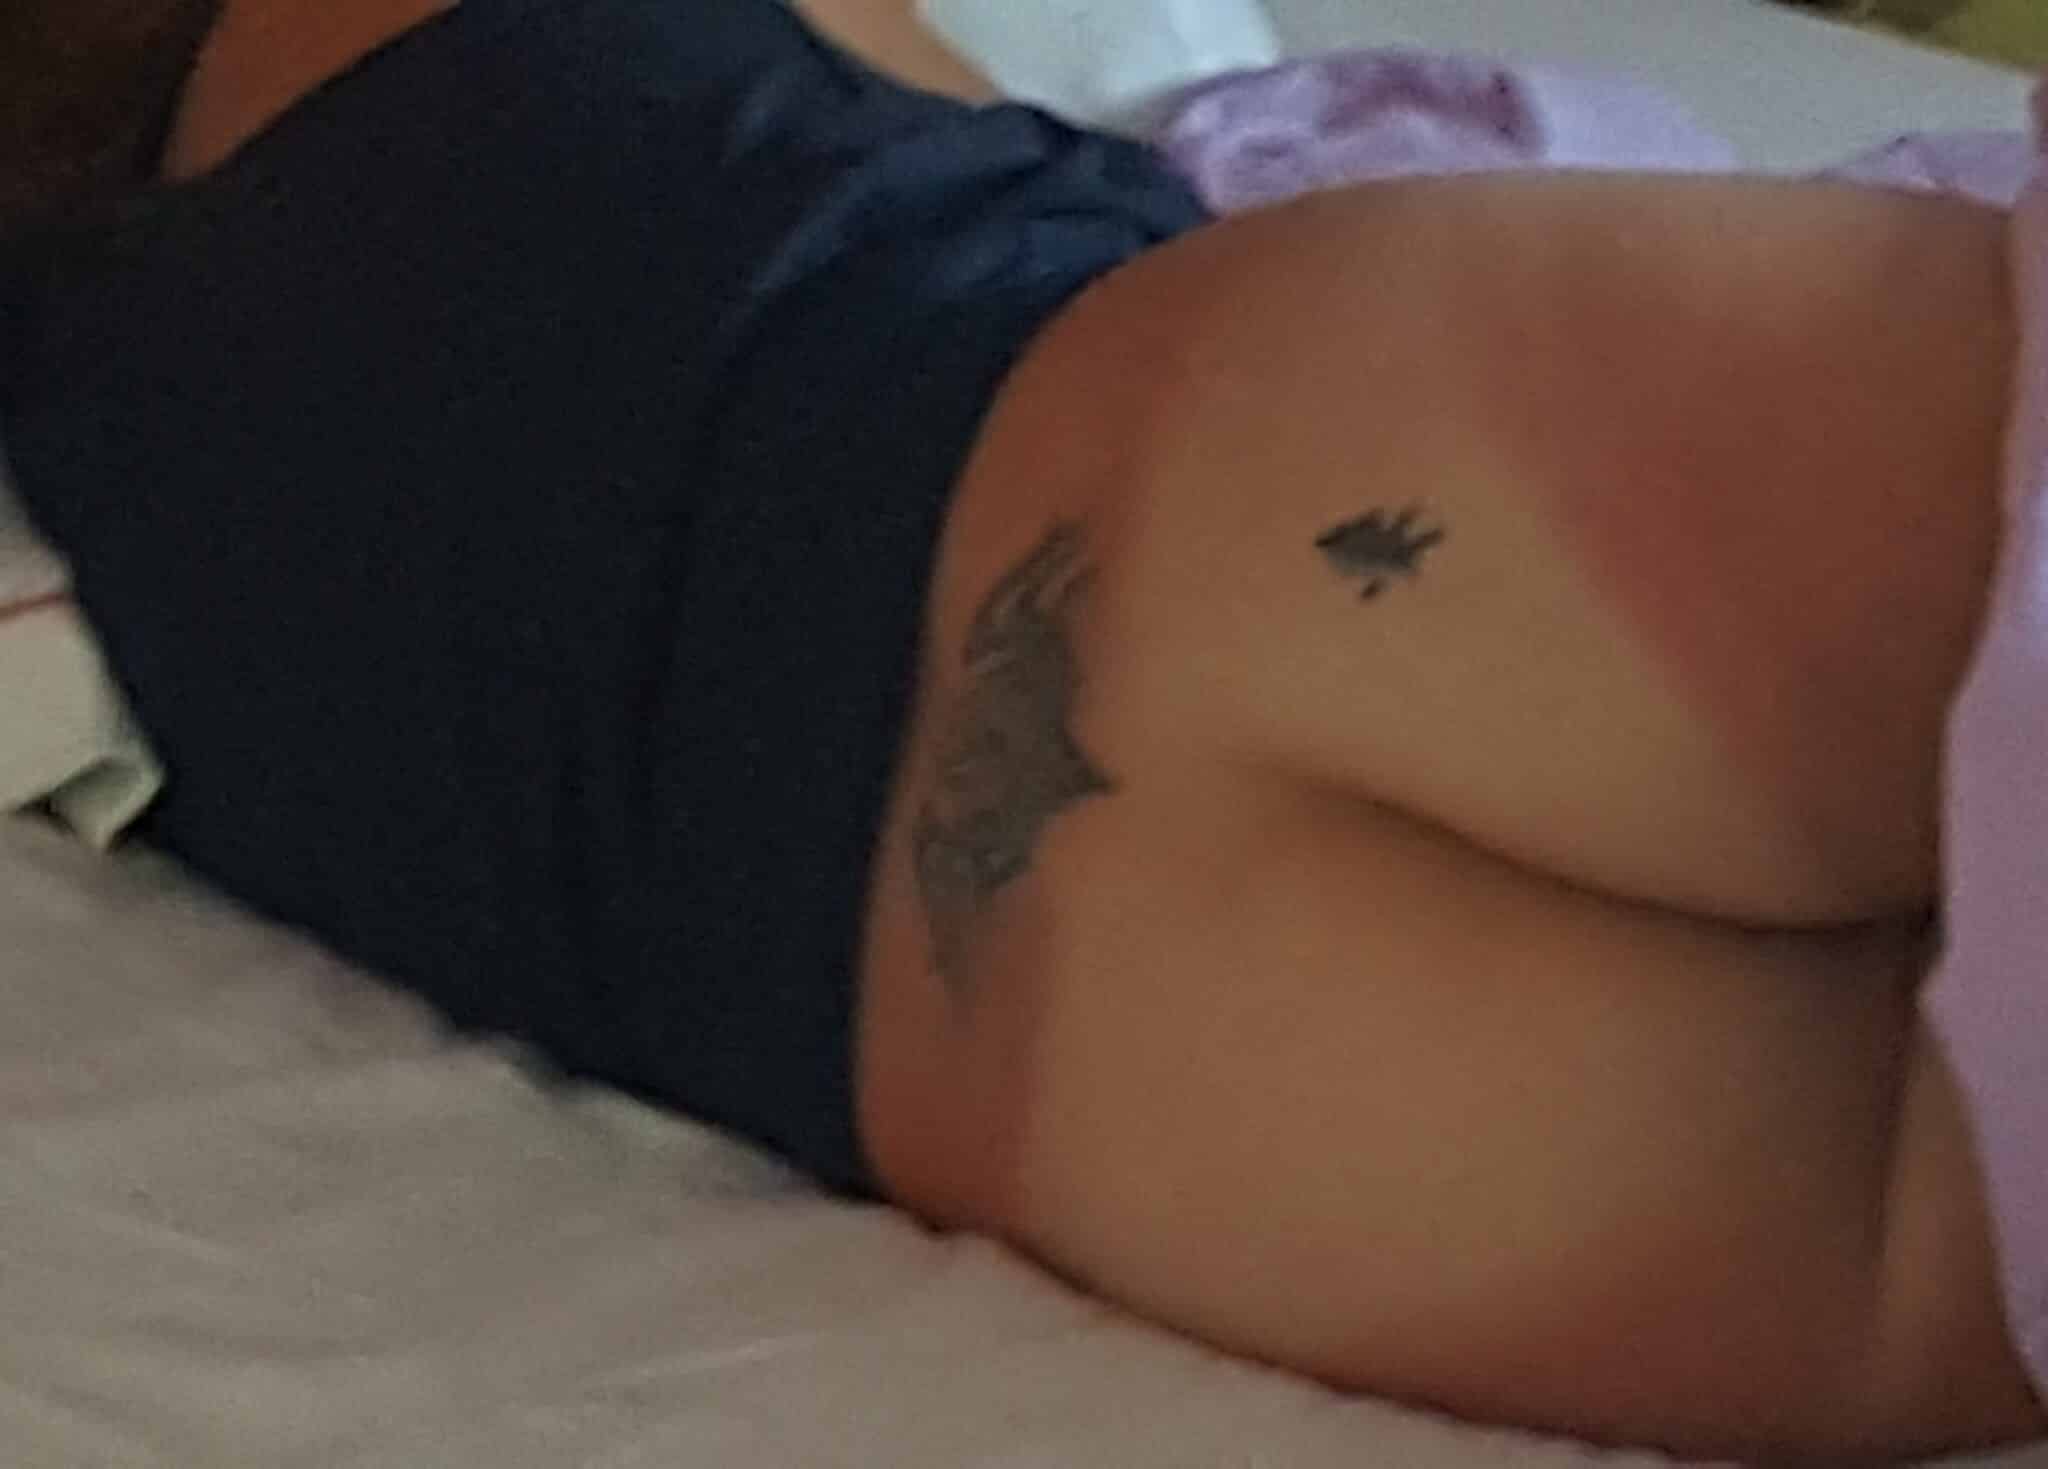 Tramp stamp Ass Flash Pics, MILF Flashing Pics, No Panties Pics, Real Amateurs from Google, Tumblr, Pinterest, Facebook, Twitter, Instagram and Snapchat. picture